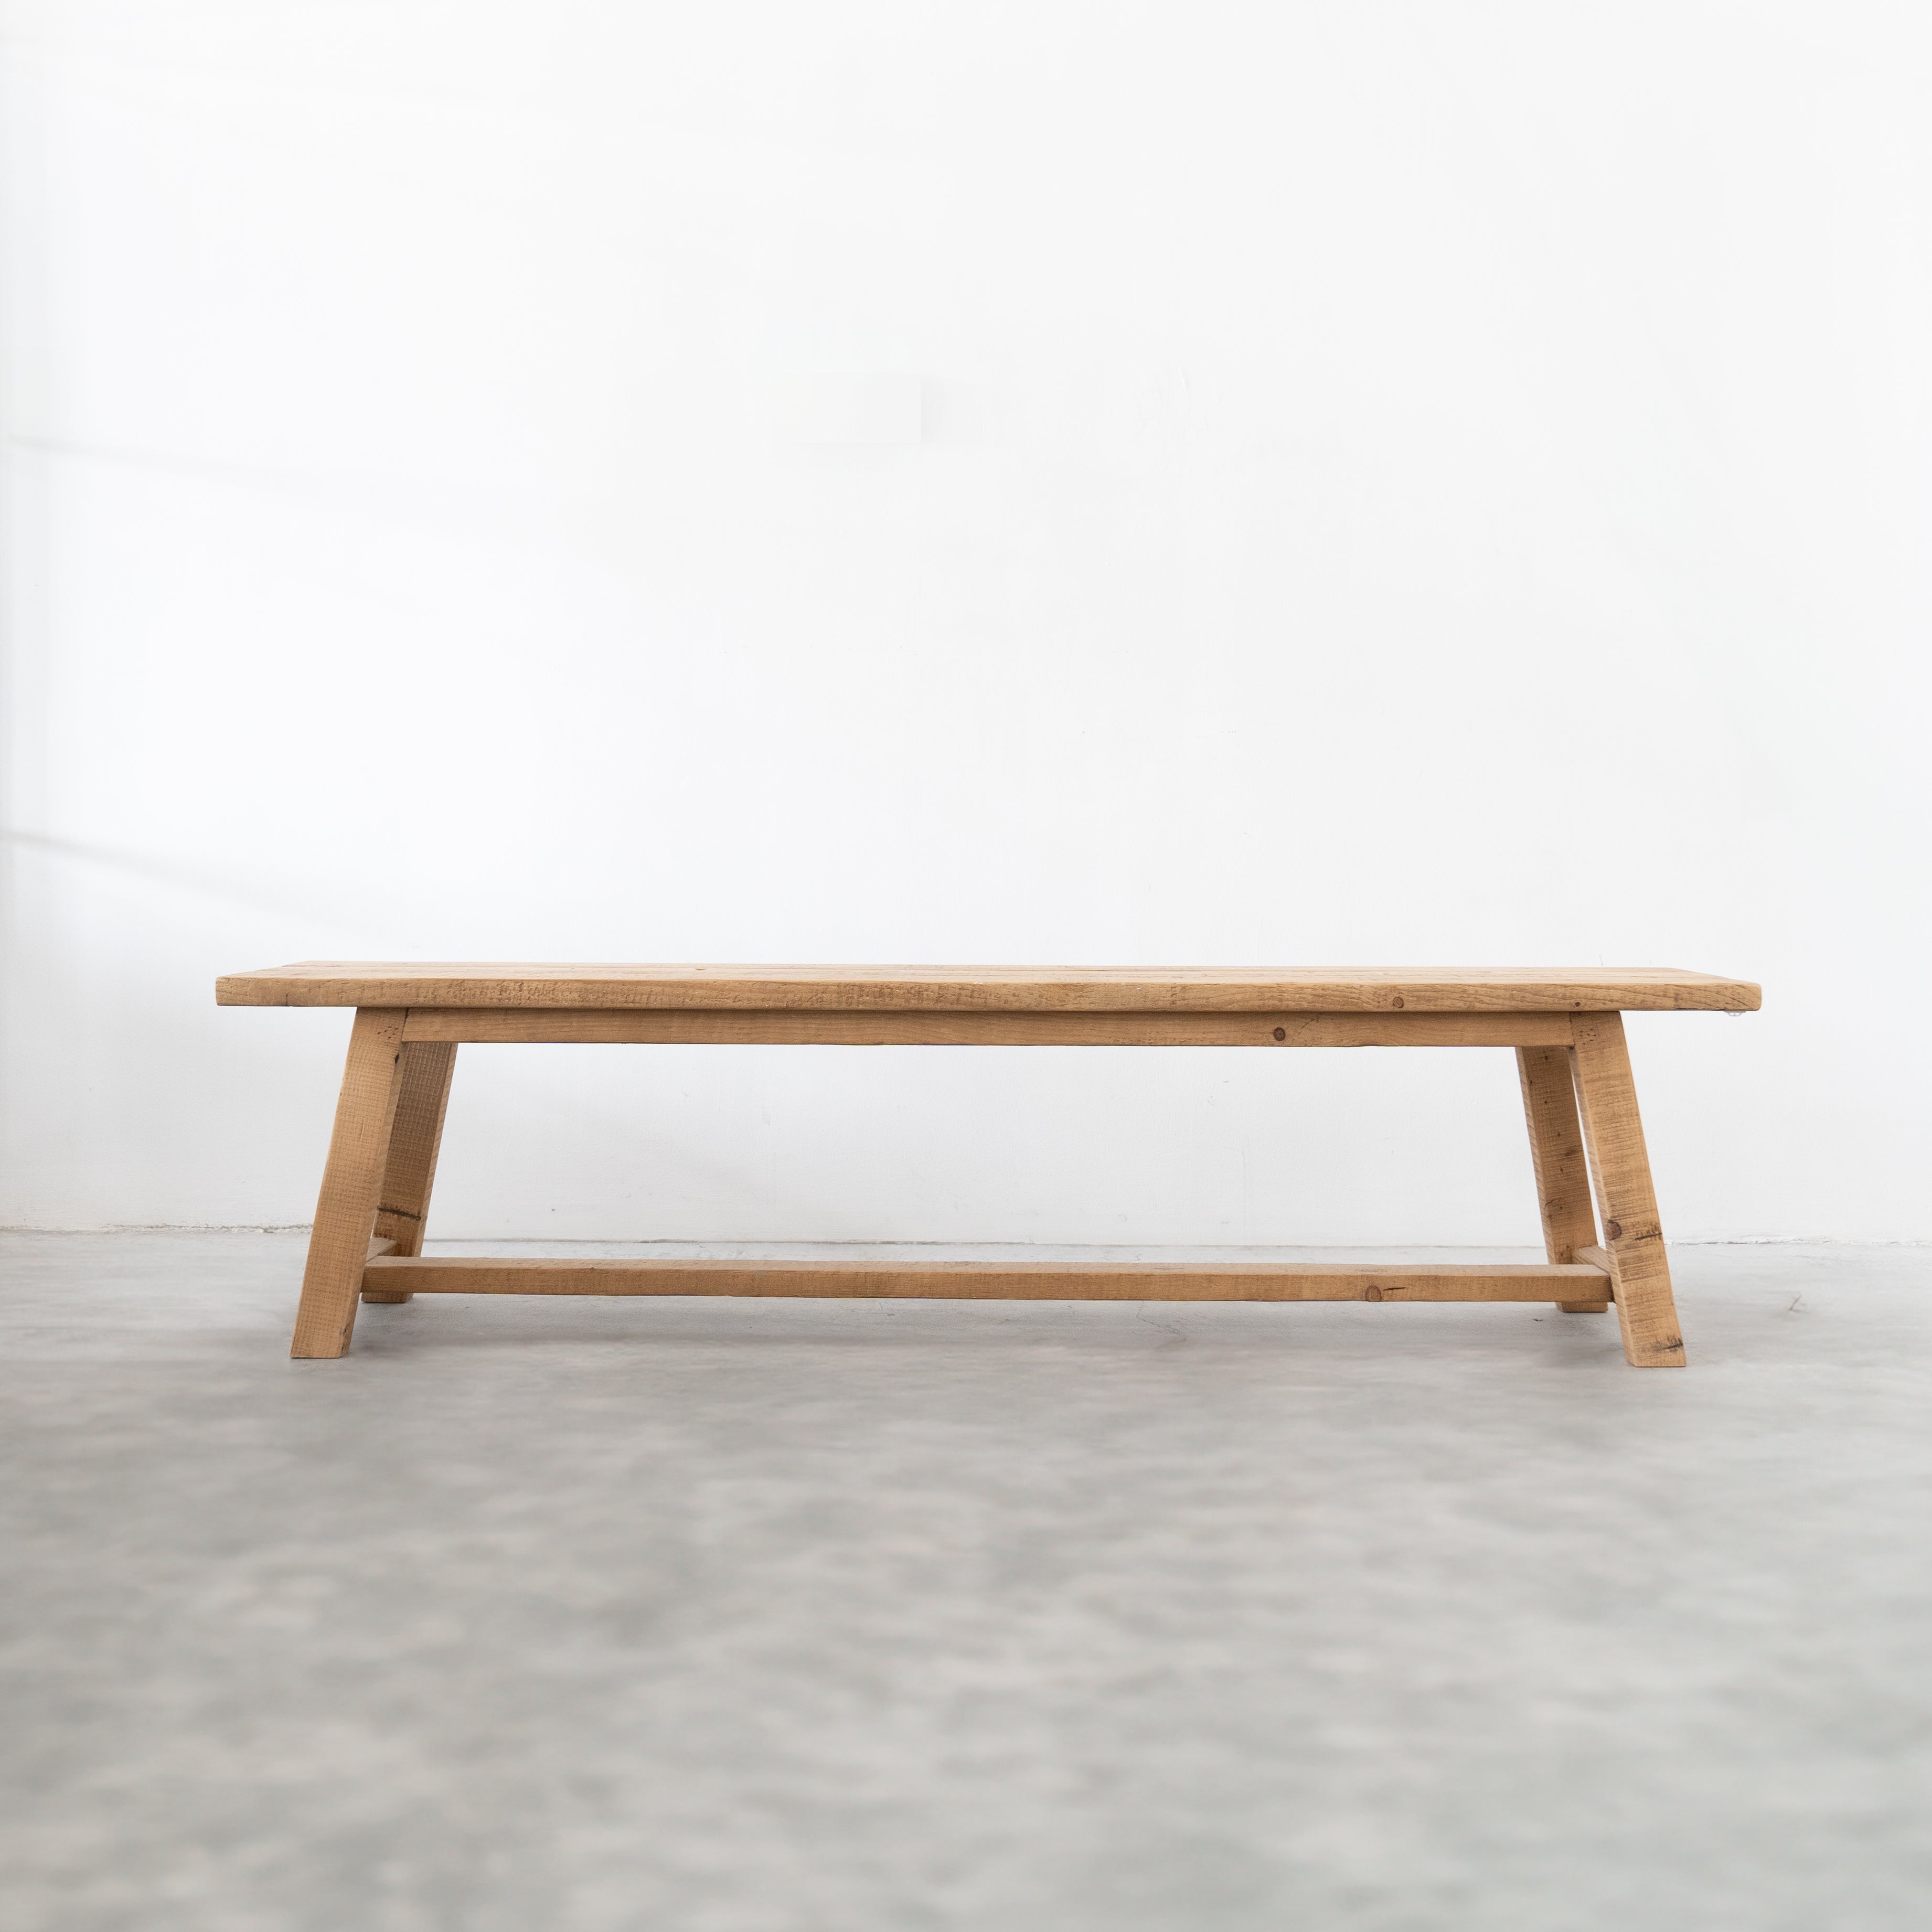 Wooden Bench  - WS Living - UAE - Bench Wood and steel Furnitures - Dubai